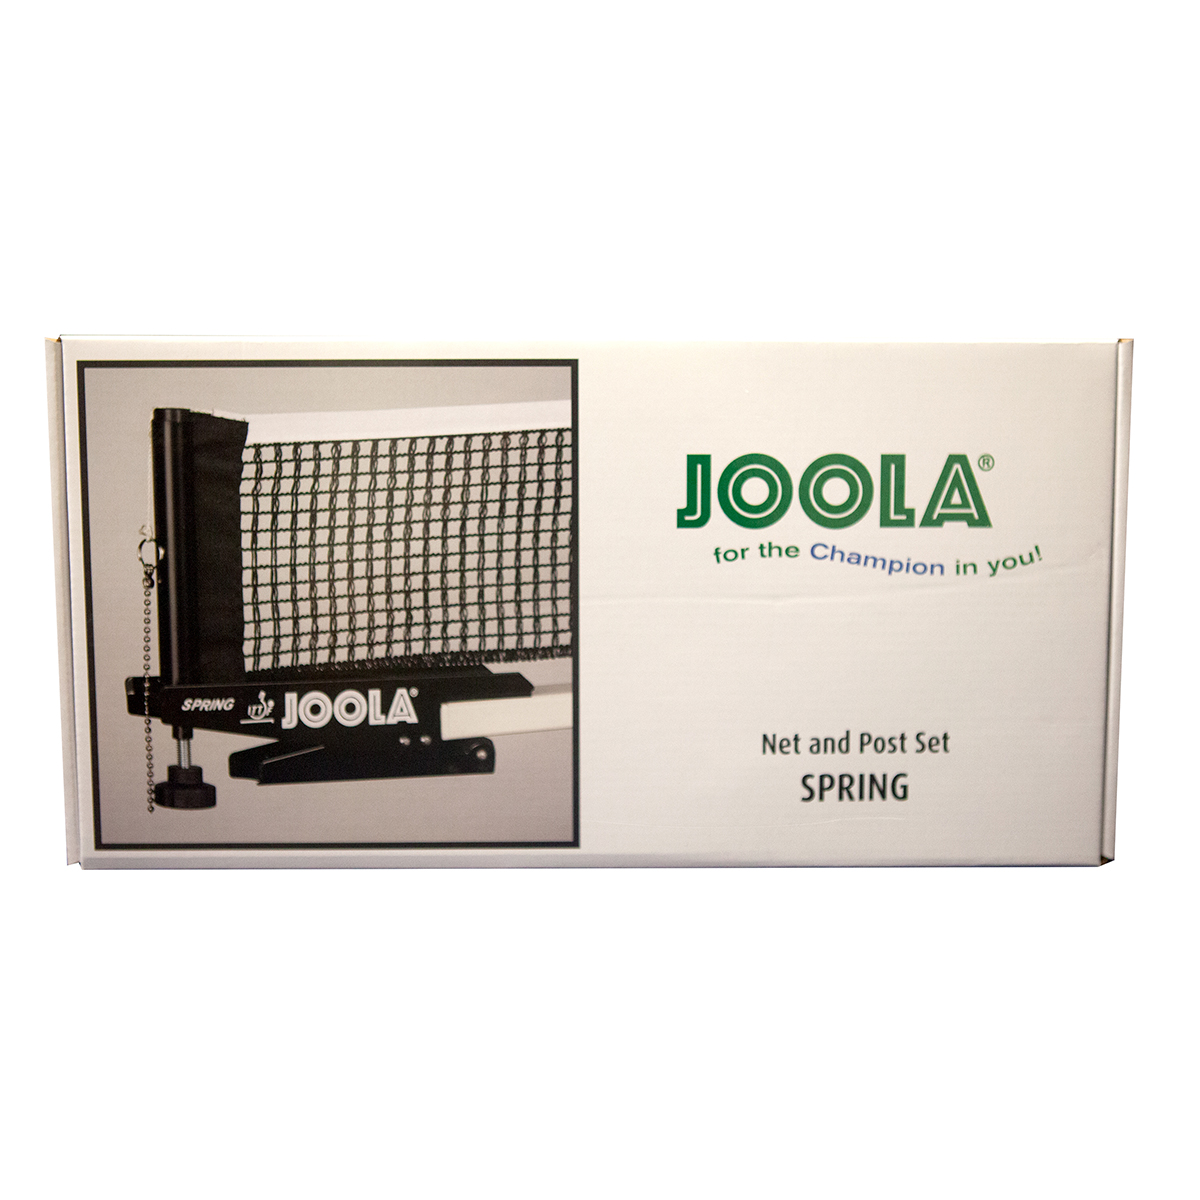 New IPONG_31050 JOOLA Spring Table Tennis Net and Post Set ITTF approved net 